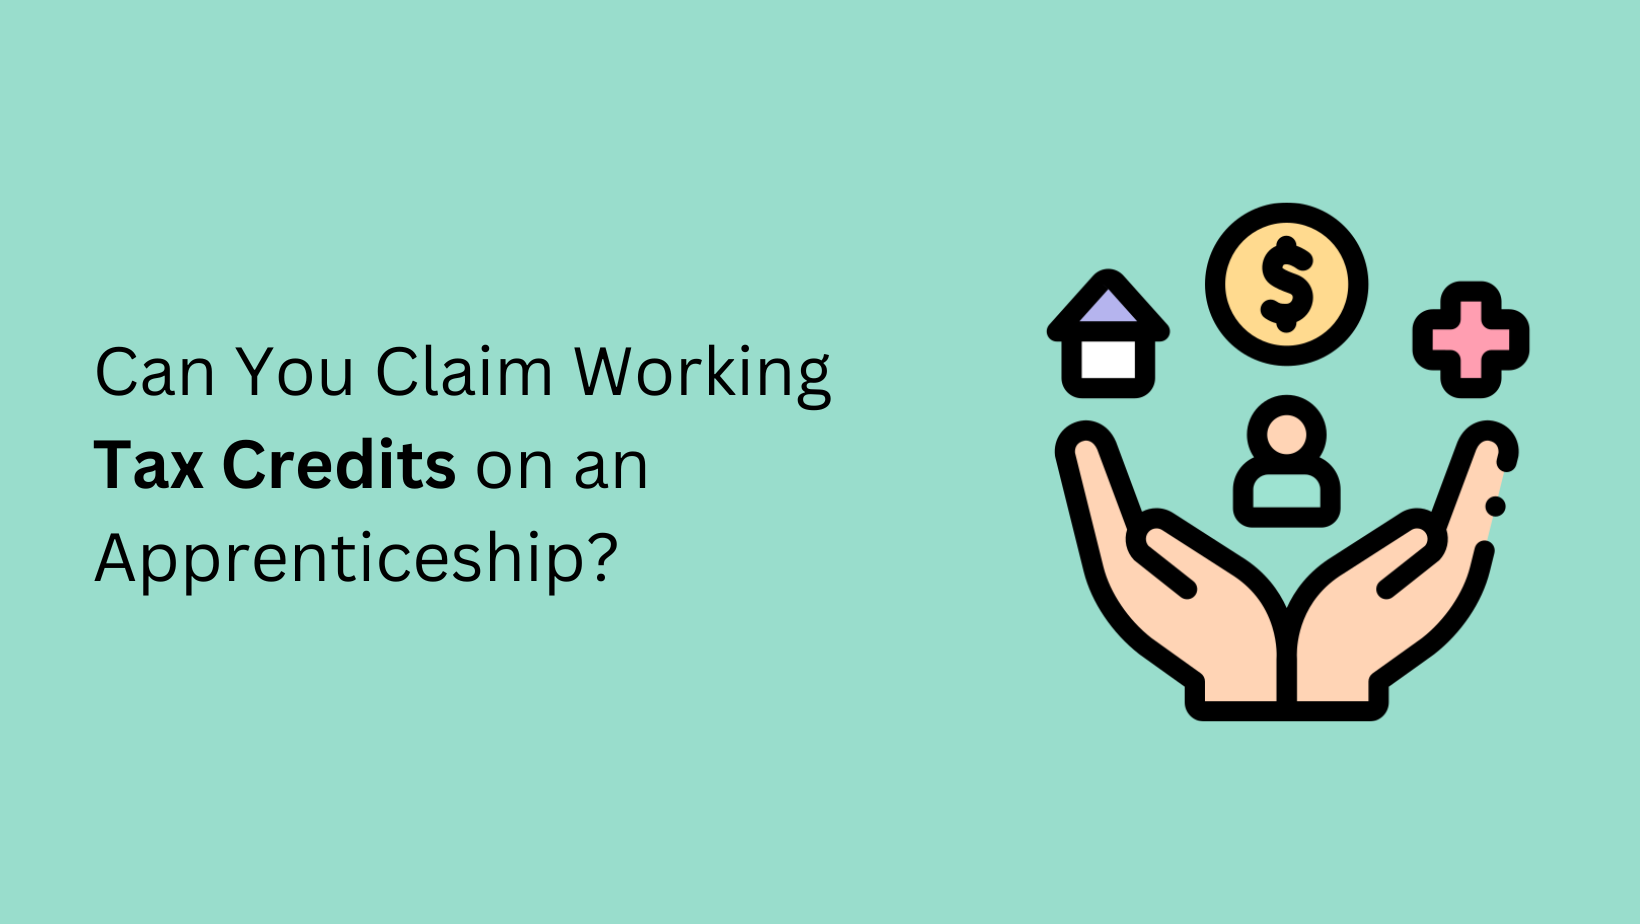 Can You Claim Working Tax Credits on an Apprenticeship